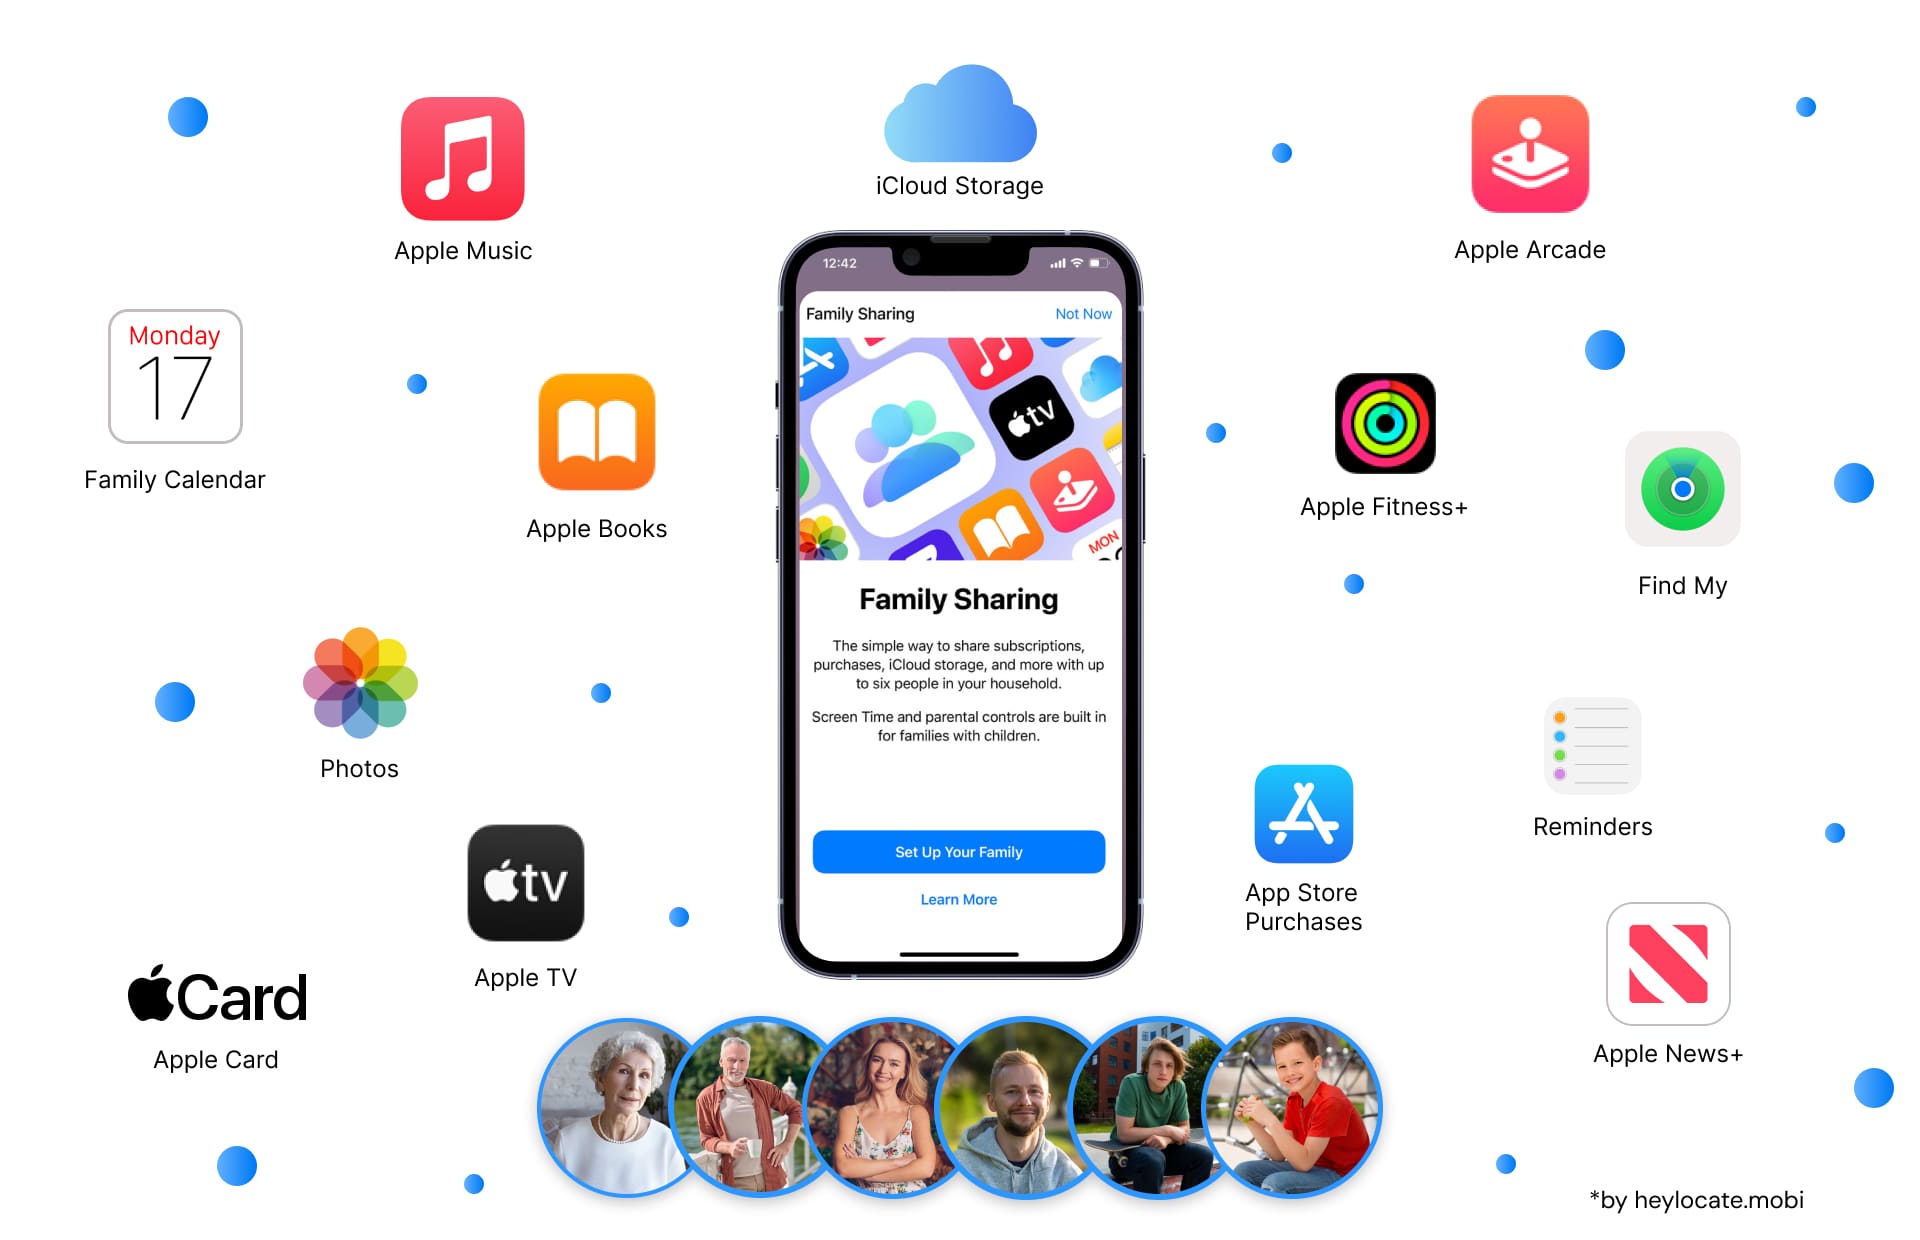 An image displaying an iPhone screen with the Family Sharing setup notification, surrounded by icons of various Apple services like Apple Music, Apple Books, iCloud, and more